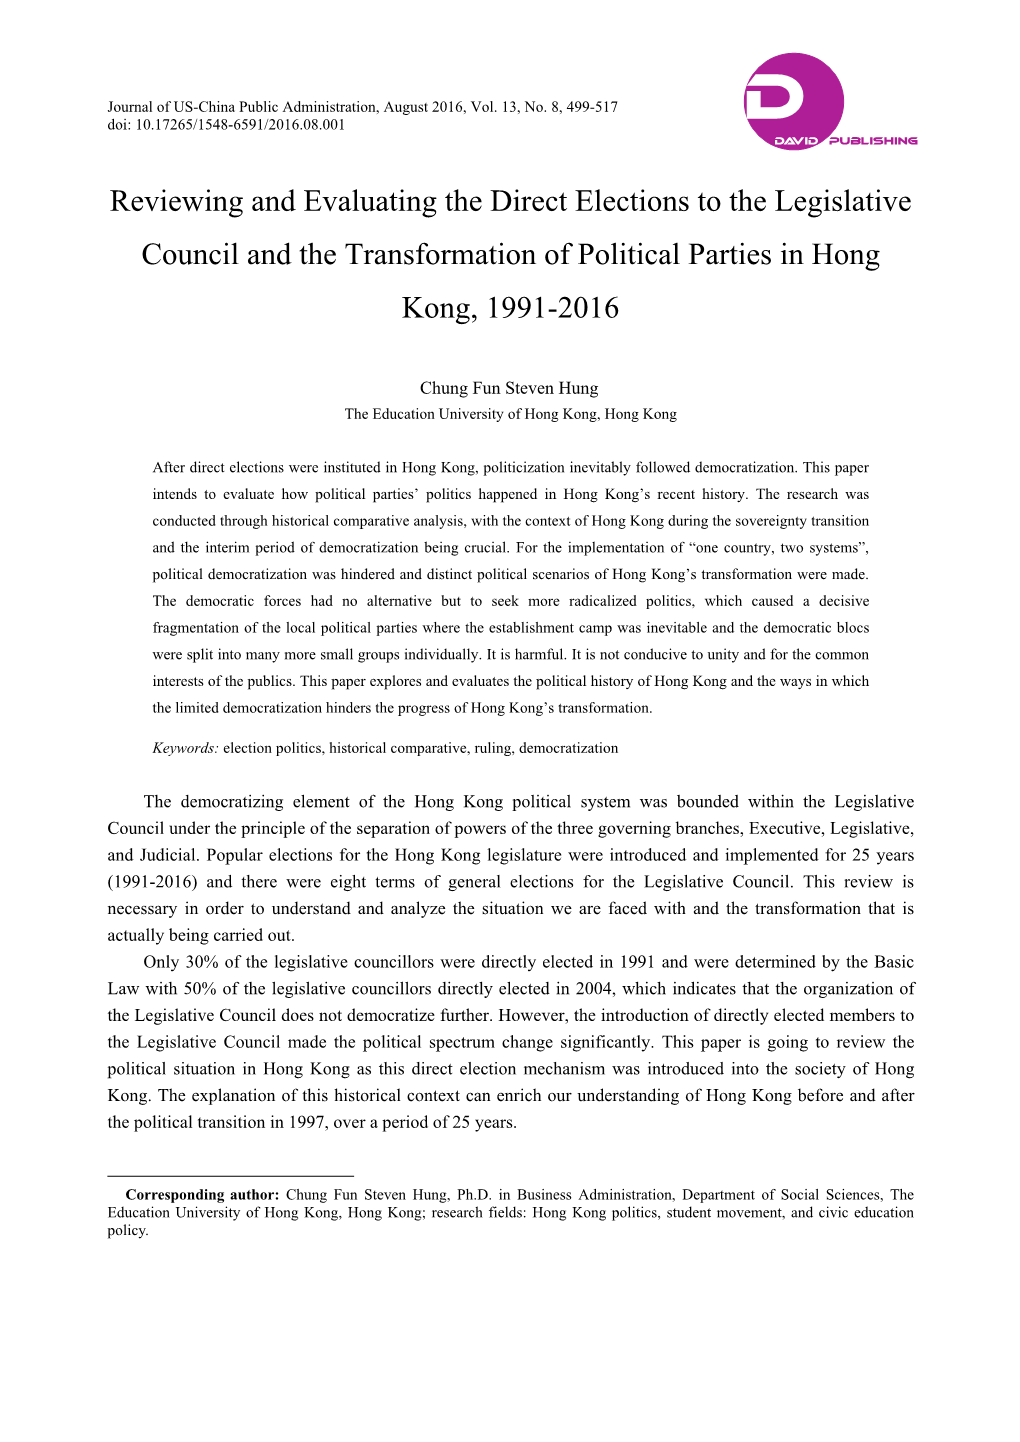 Reviewing and Evaluating the Direct Elections to the Legislative Council and the Transformation of Political Parties in Hong Kong, 1991-2016